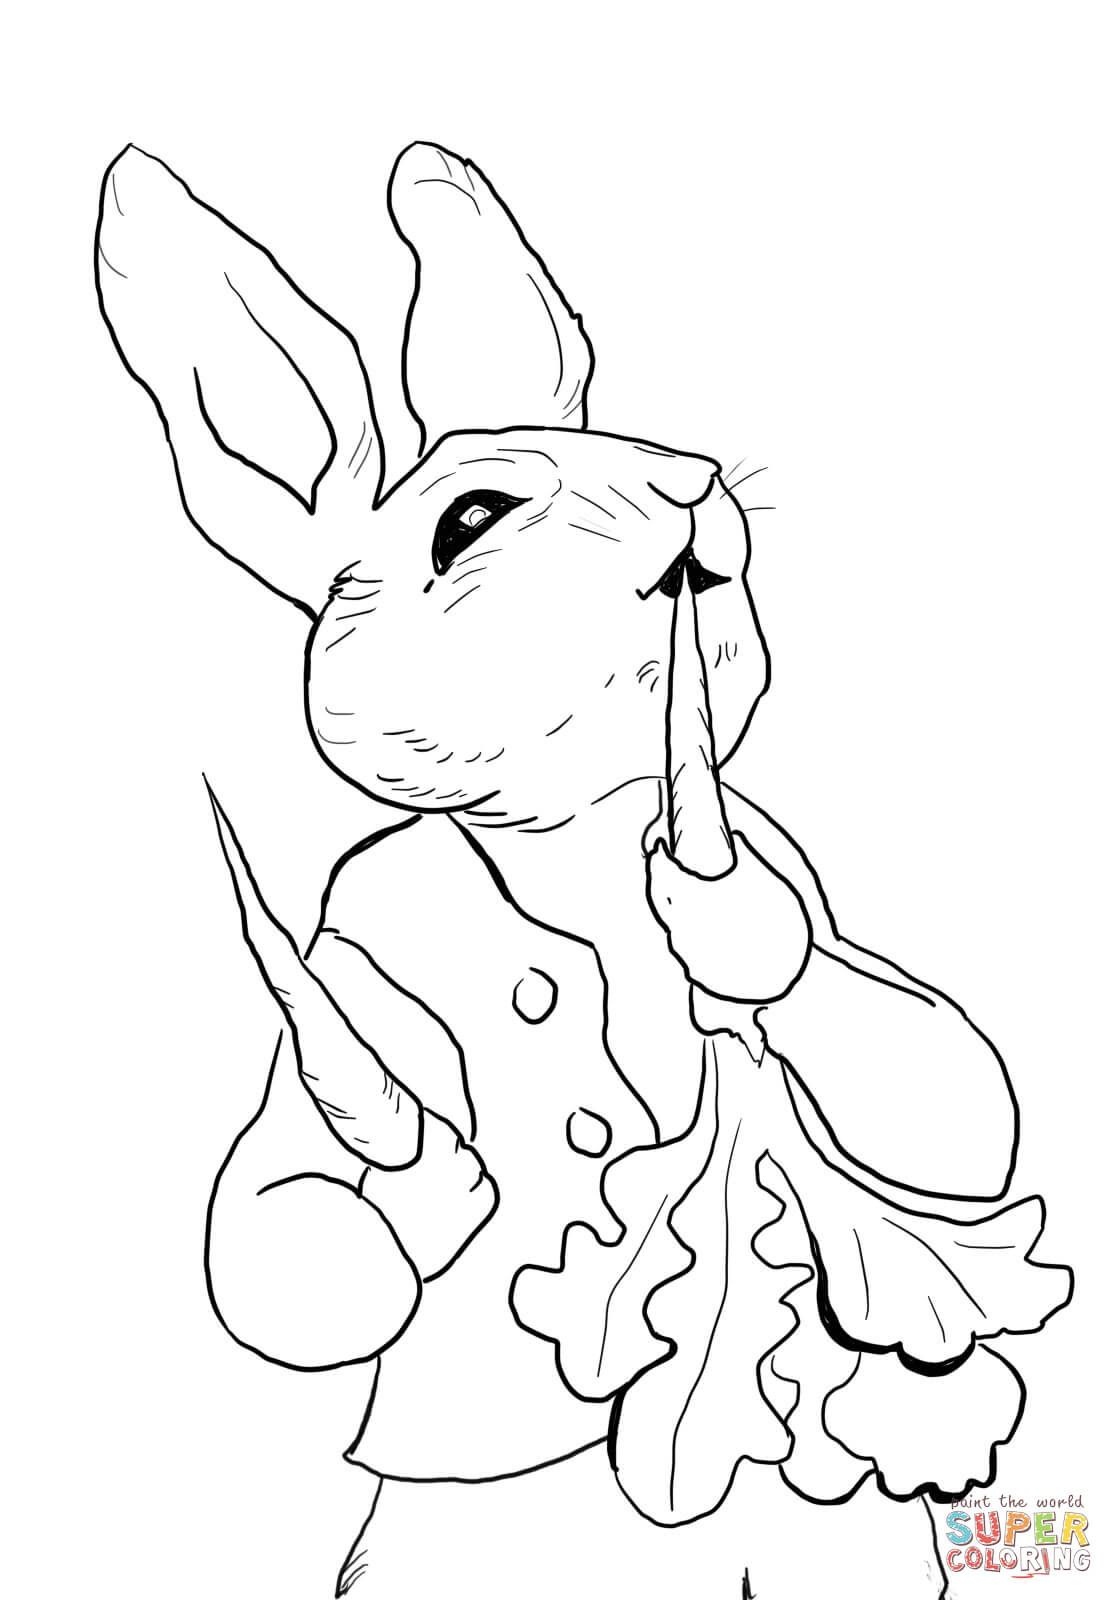 Peter Rabbit Eating Radishes Coloring Page From Peter Rabbit - Free Printable Peter Rabbit Coloring Pages